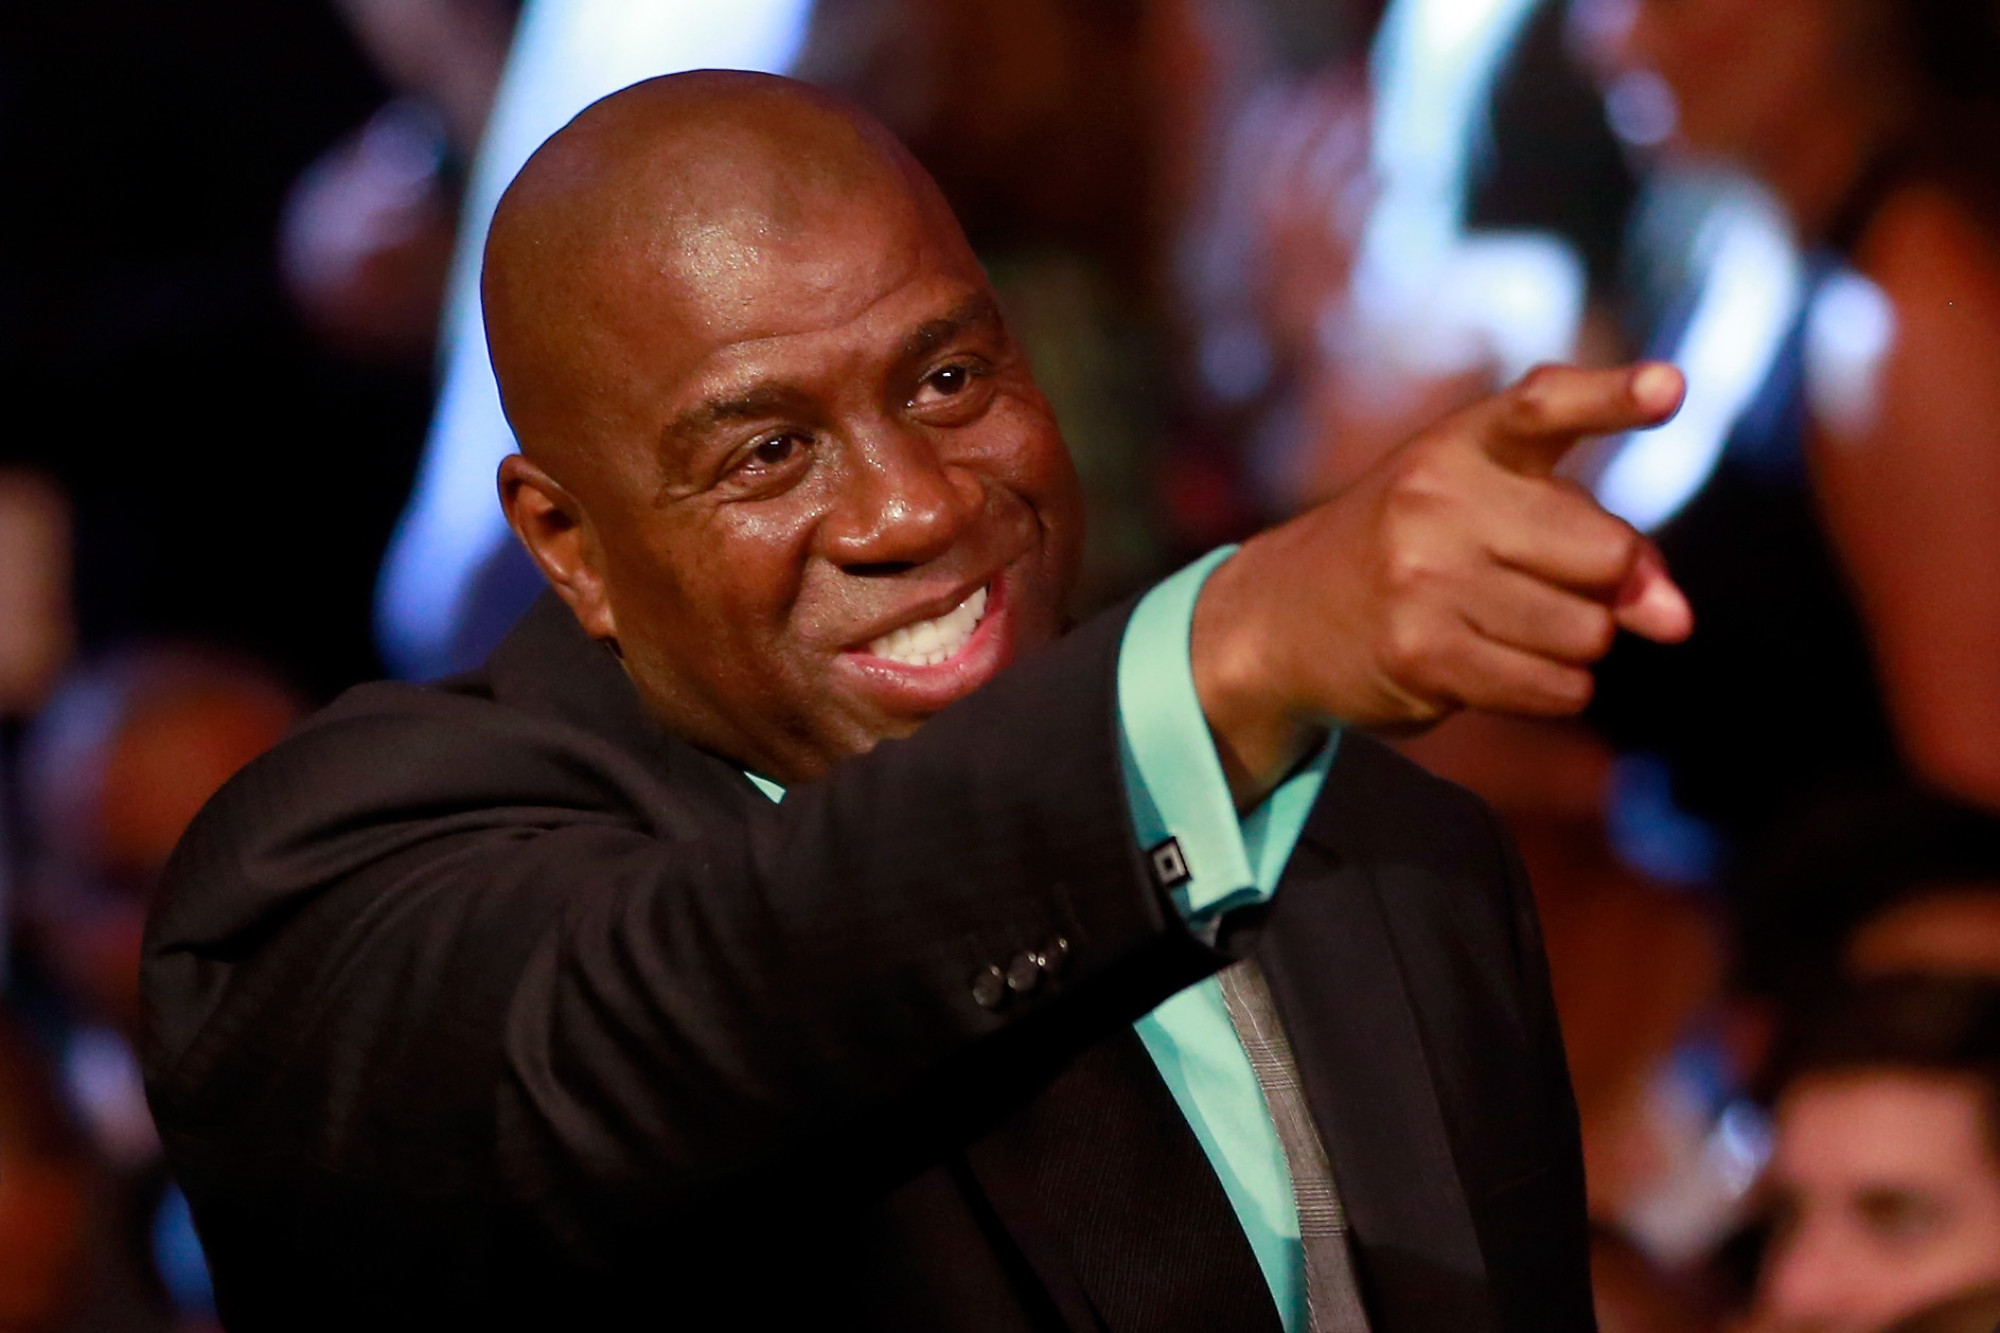 Magic Johnson Youth Program In Chicago: Ex-NBA Star Launches Initiative For At-Risk Kids